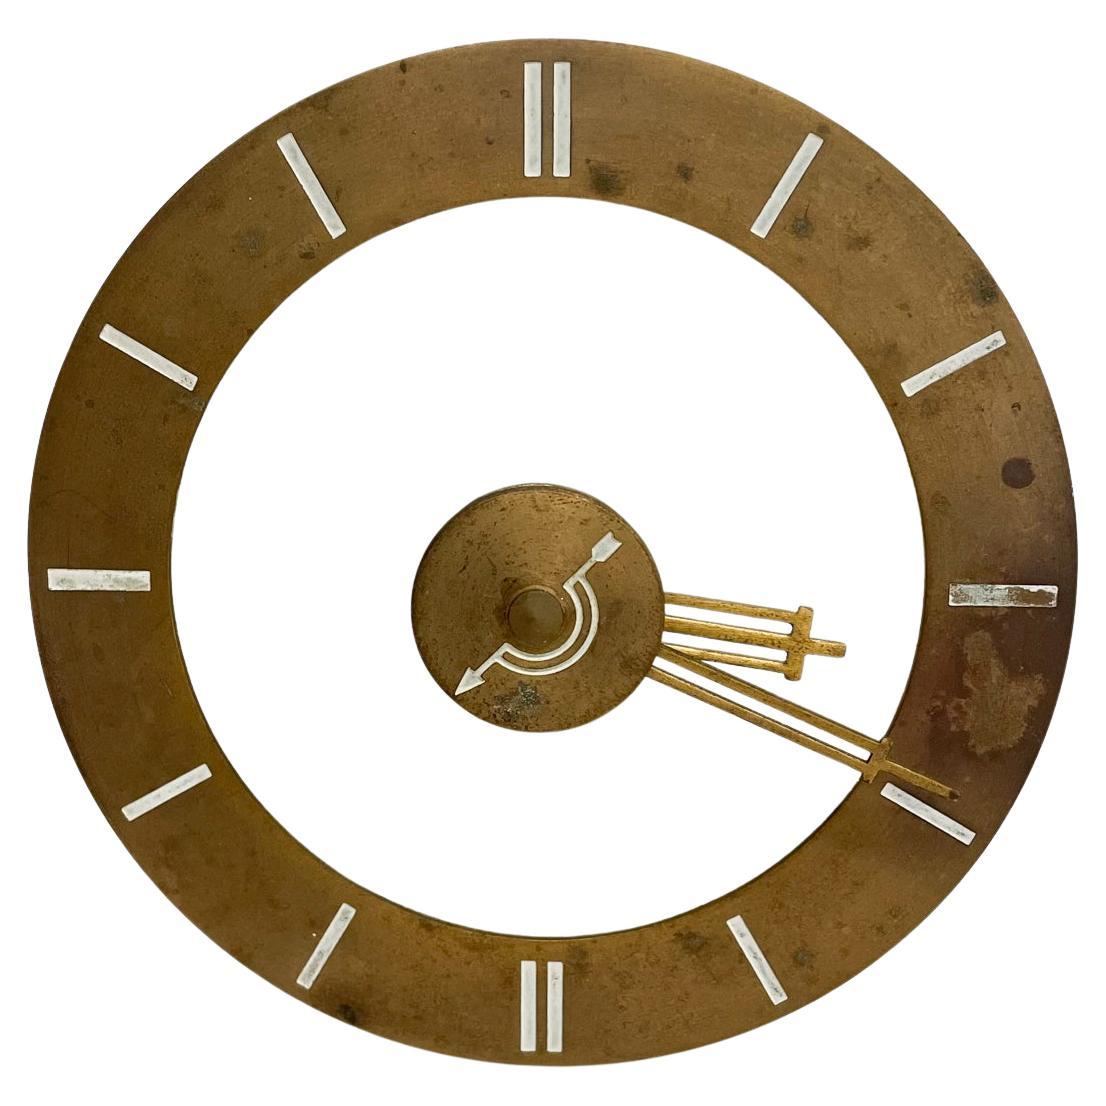 Fabulous Art Deco clock.
1930s Art Deco clock with quartzite marble stone and brass hands. 
By Hammond Clock Company Chicago IL
Retrofitted from electrical movement to quartz (battery operated) The back panel was preserved for looks, however, the